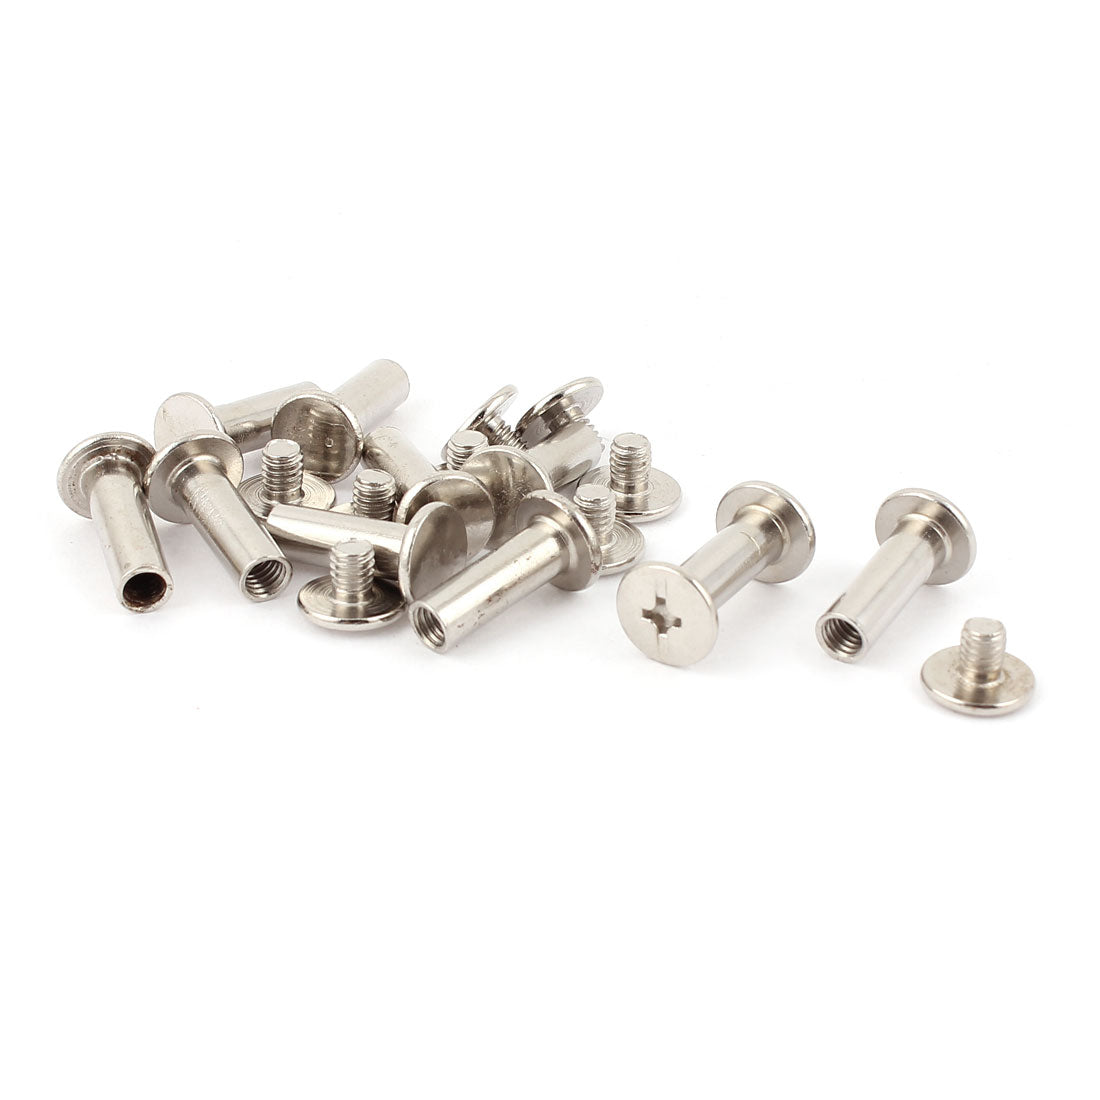 uxcell Uxcell 10pcs 5mmx15mm Nickel Plated Binding Chicago Screw Post for Album Scrapbook